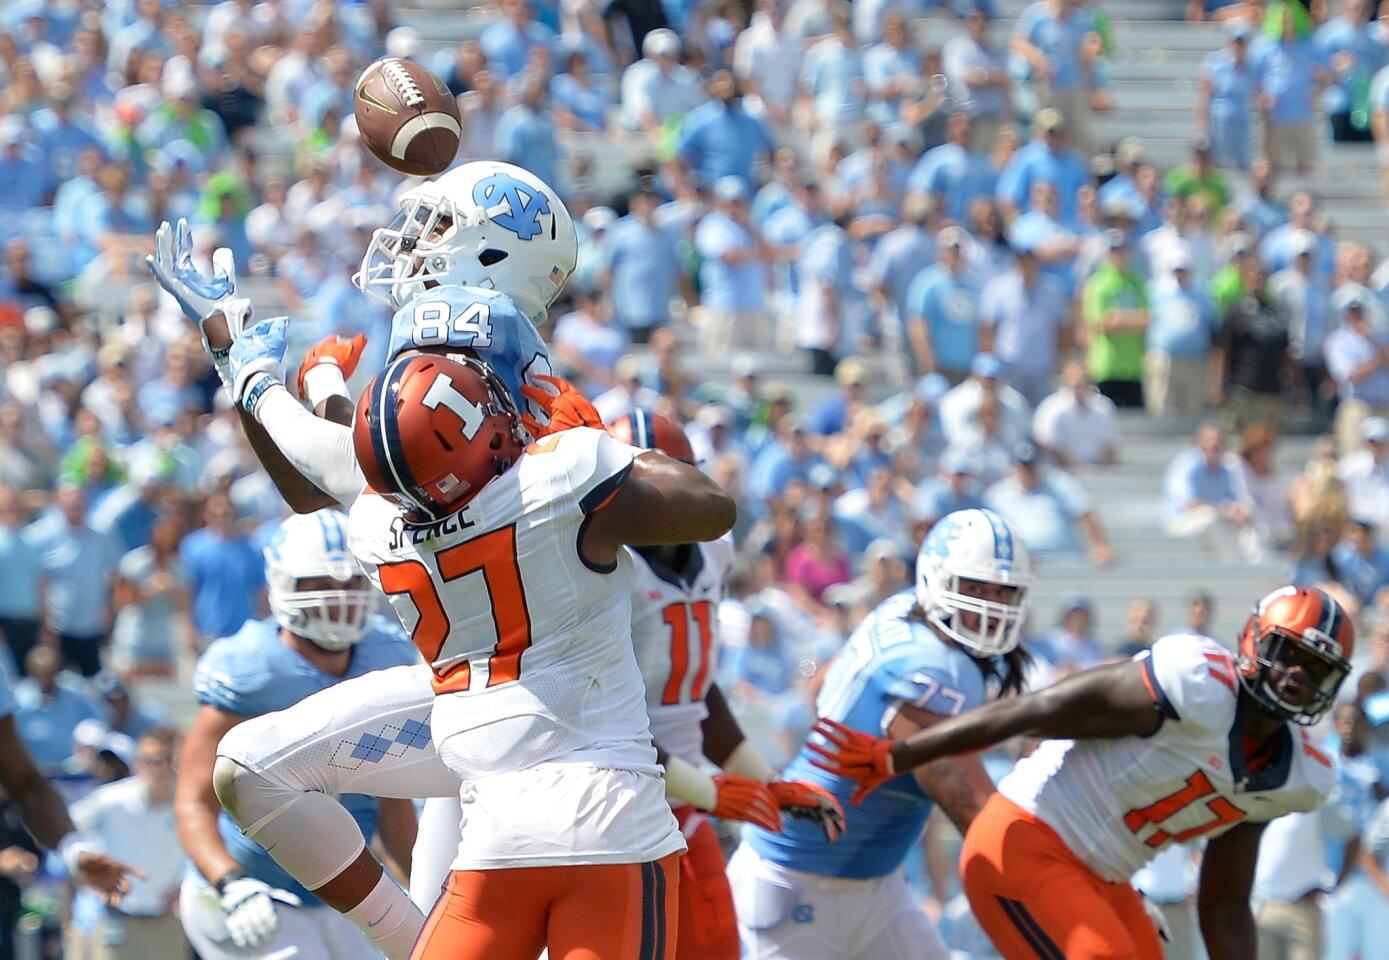 Eaton Spence breaks up a pass intended for North Carolina's Bug Howard.